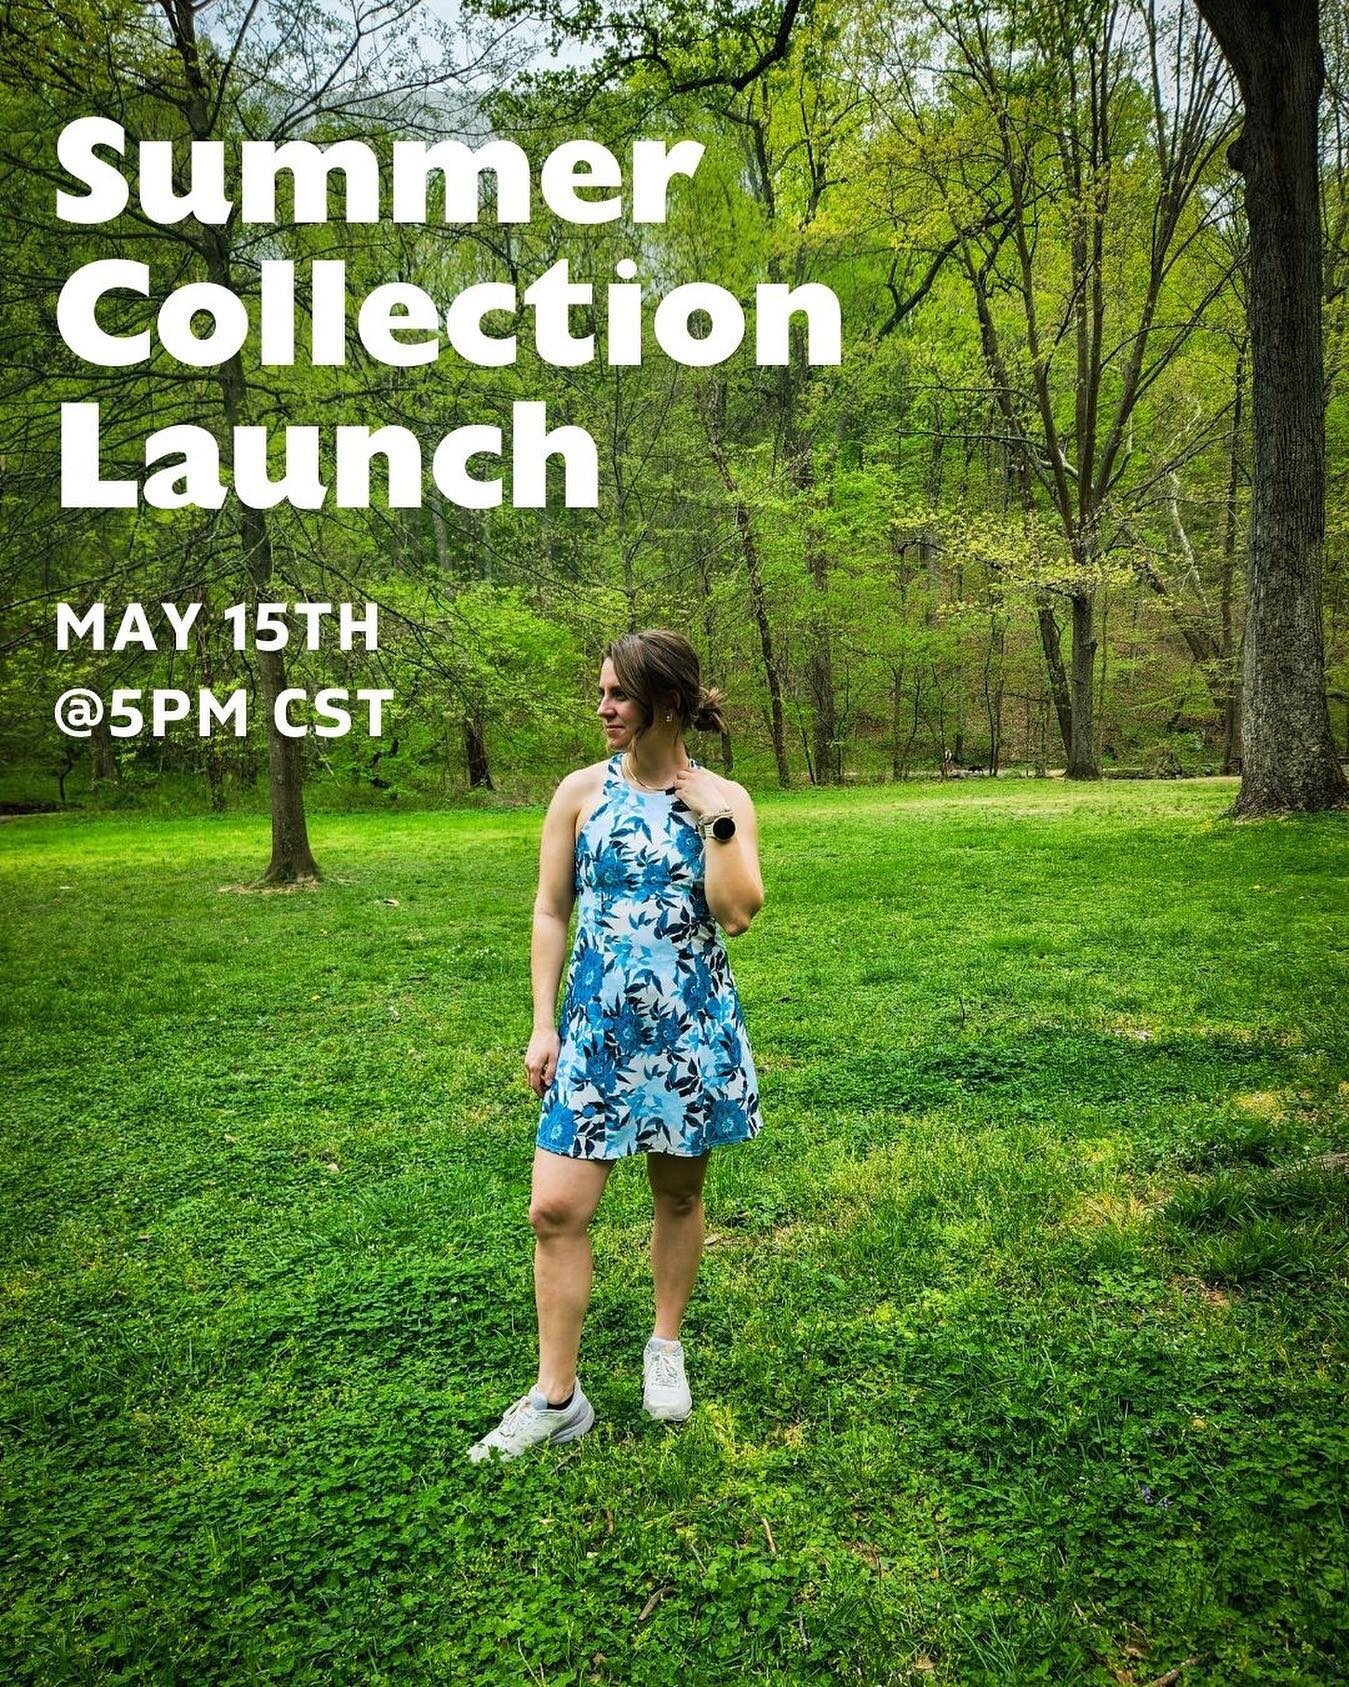 Mark your calendars for Monday May 15th! 

We are excited to debut a revamp of items from last summer as well as some new pieces! 

Stay tuned to see all of our new products 🔜